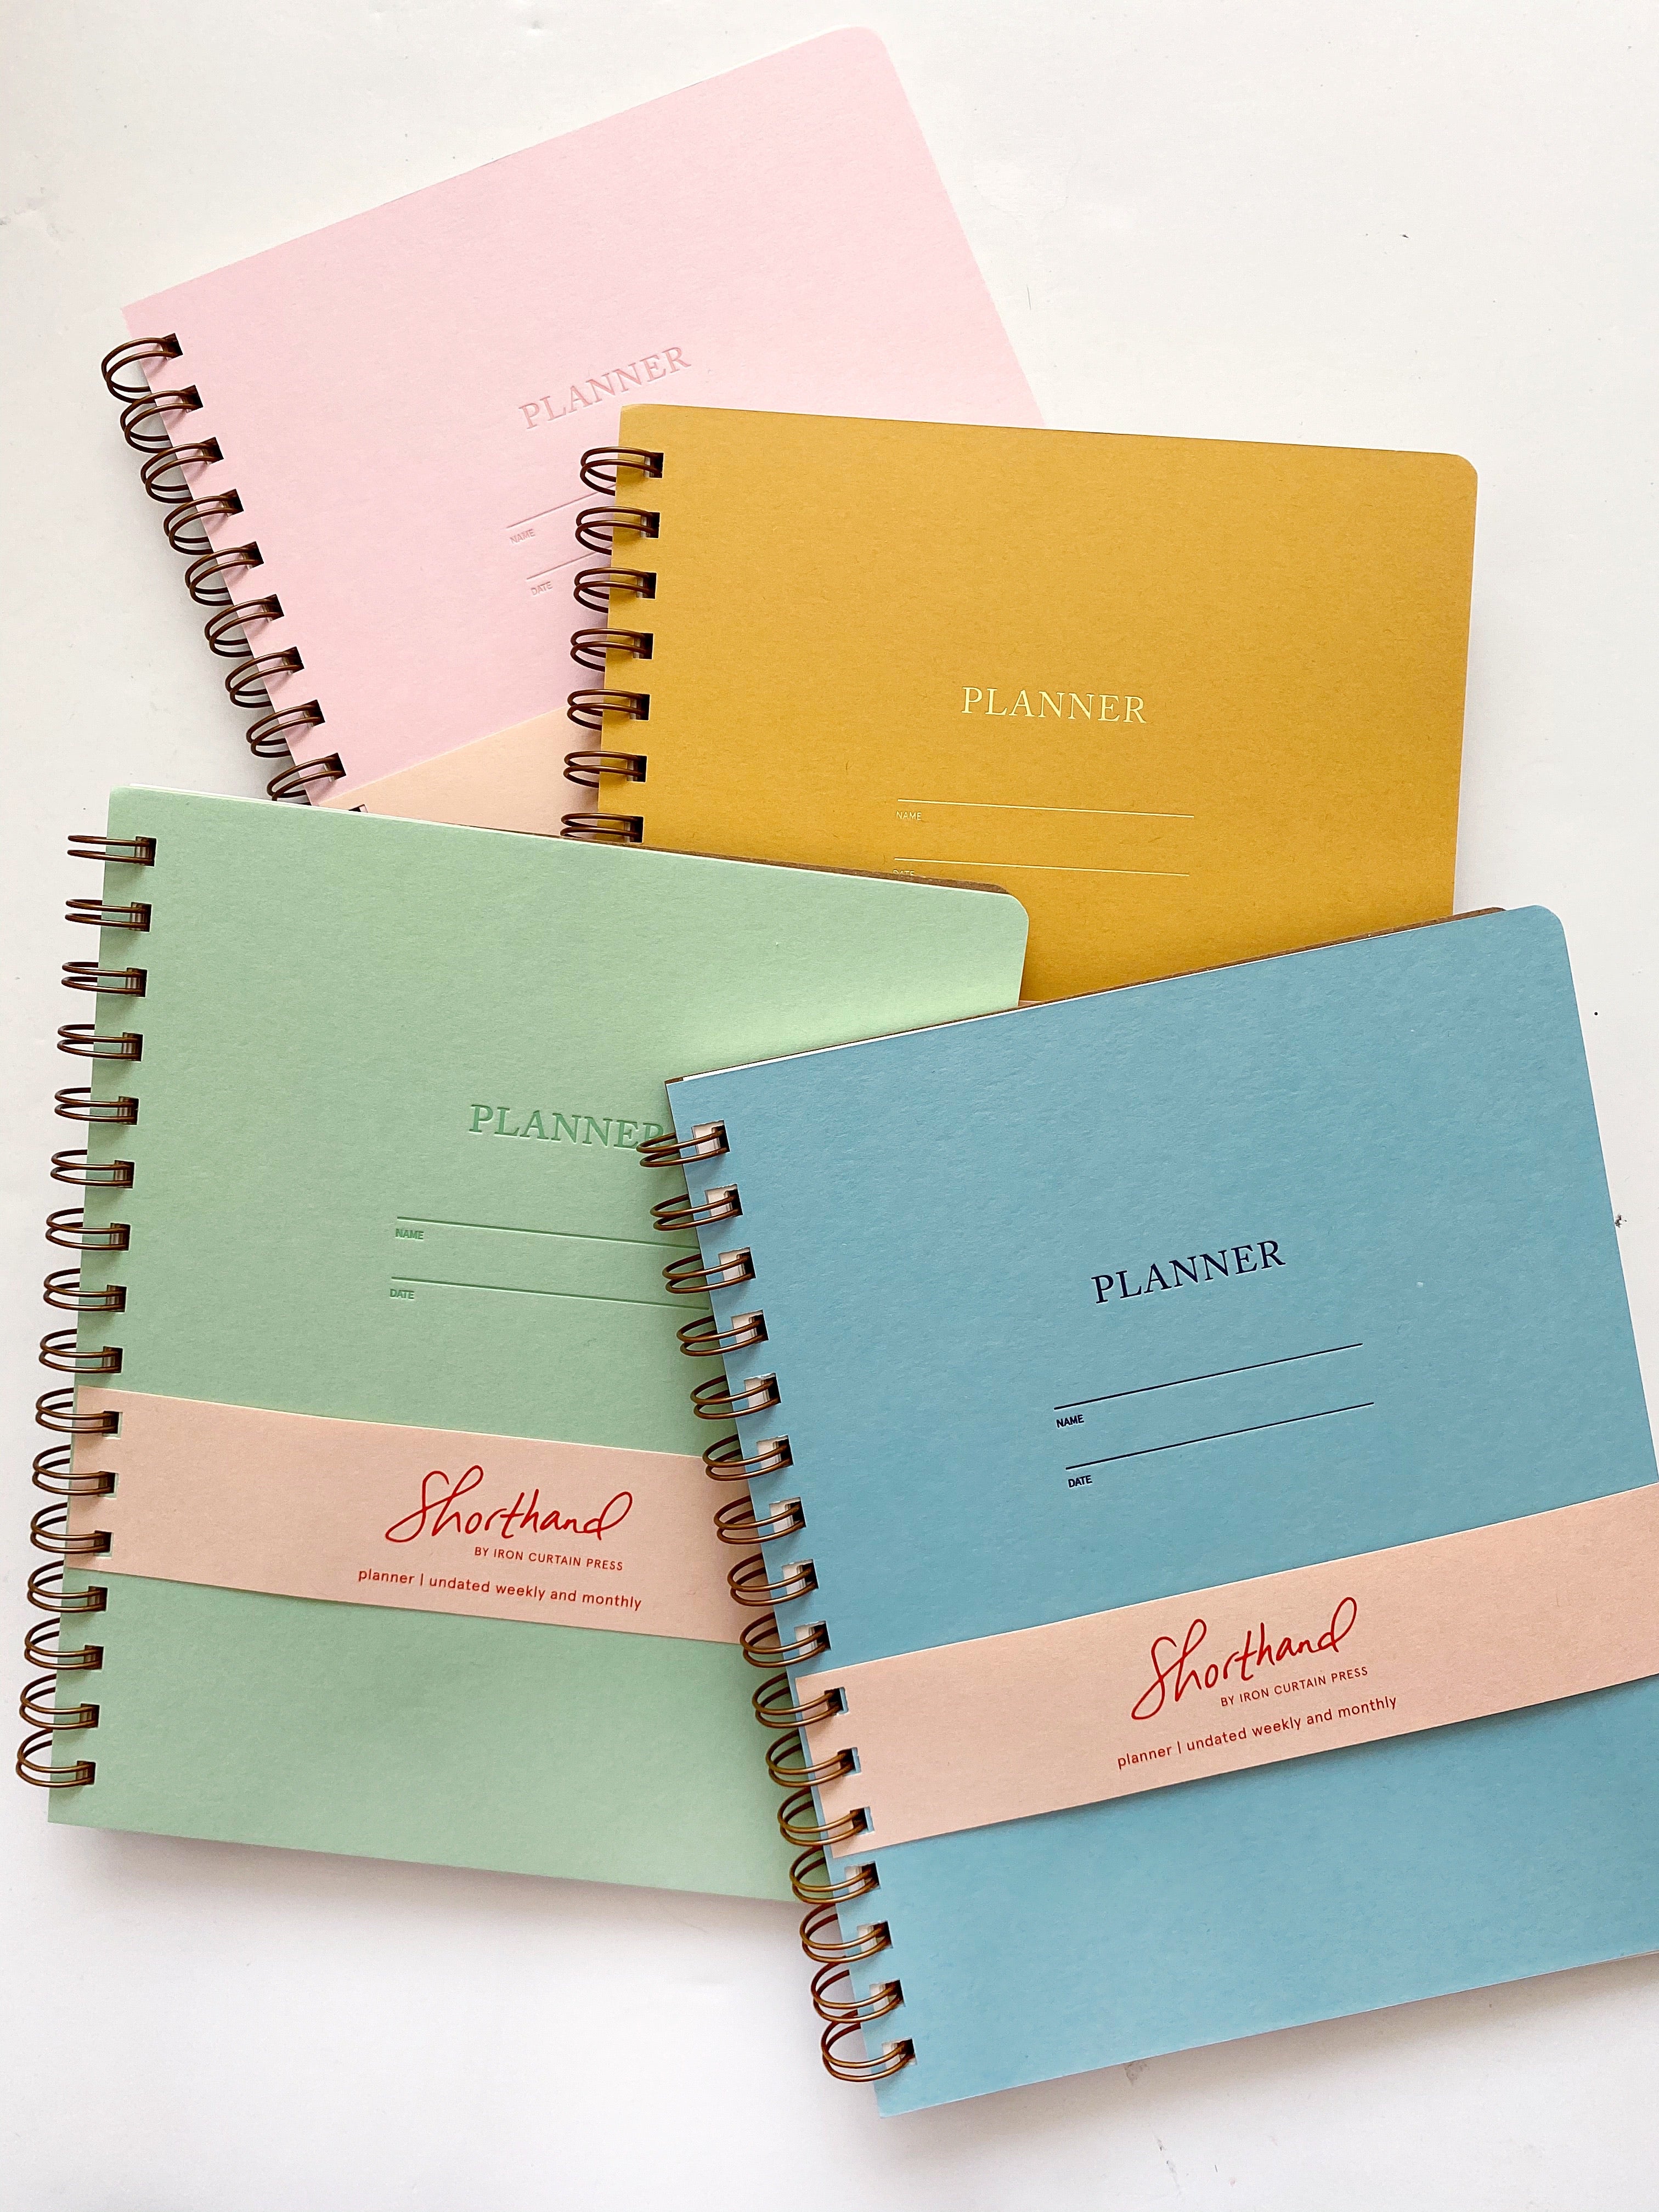 Image of planner covers in light pink, mustard, pool, and mint with side coiled binding. Letter pressed text says, “Planner”, “name” and “date” with lines for writing,